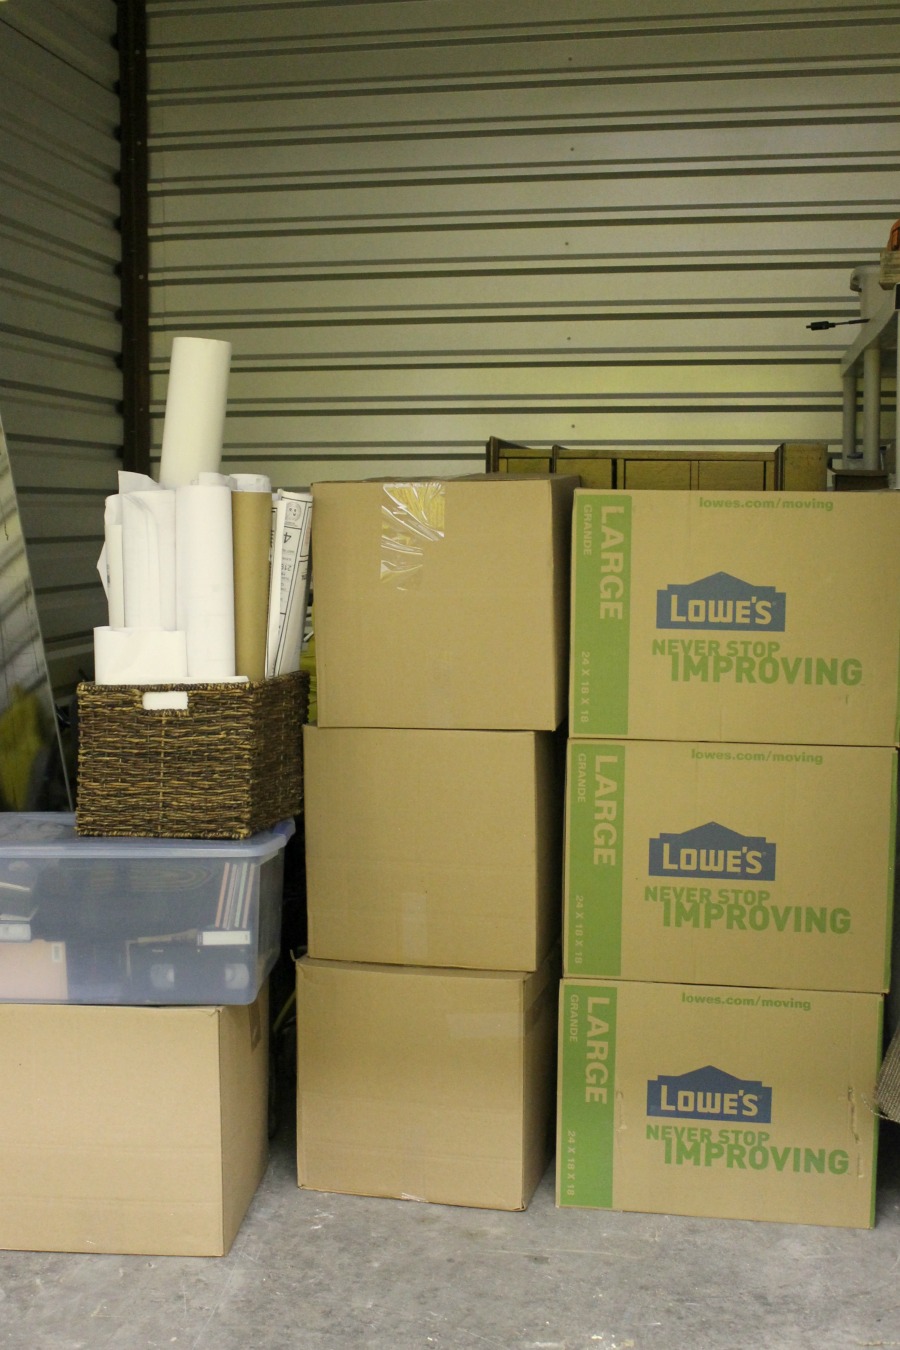 21 Things to Do Before Selling Your Home - Move clutter to a storage unit.